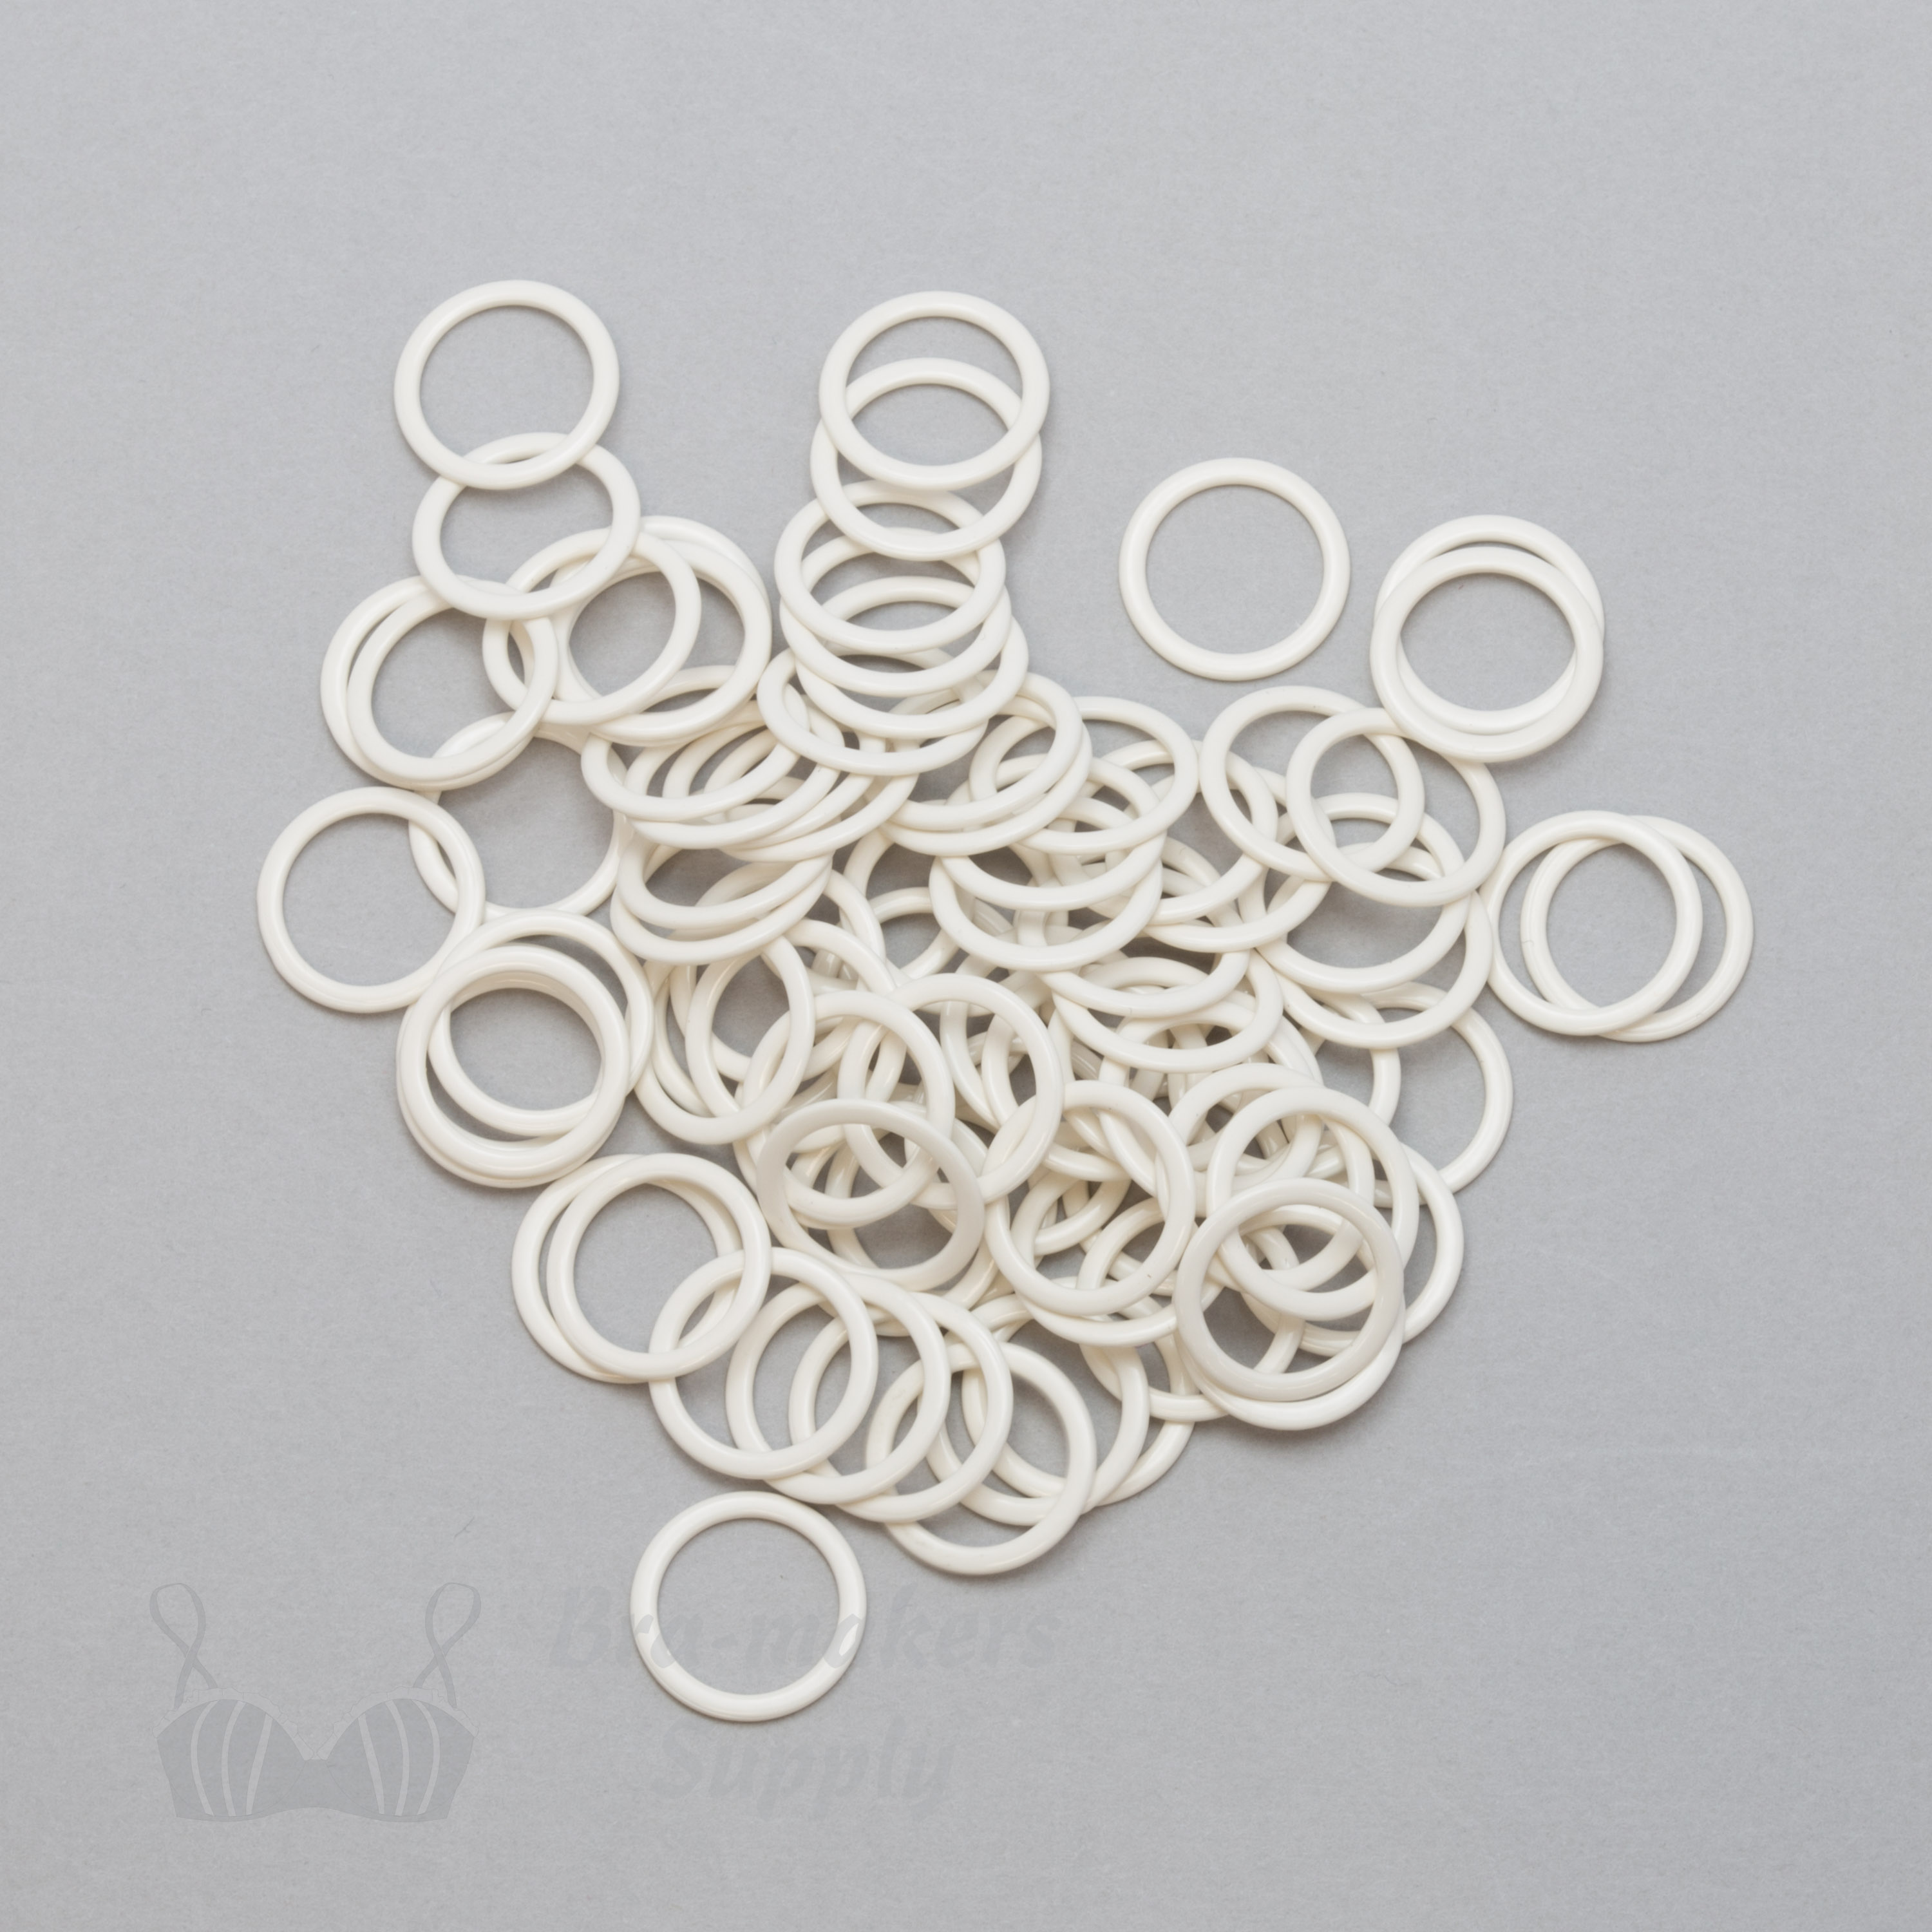 half inch 12mm RM-400 R ivory nylon coated metal rings sliders or winter white Pantone 11-0507 from Bra-Makers Supply 100 rings shown